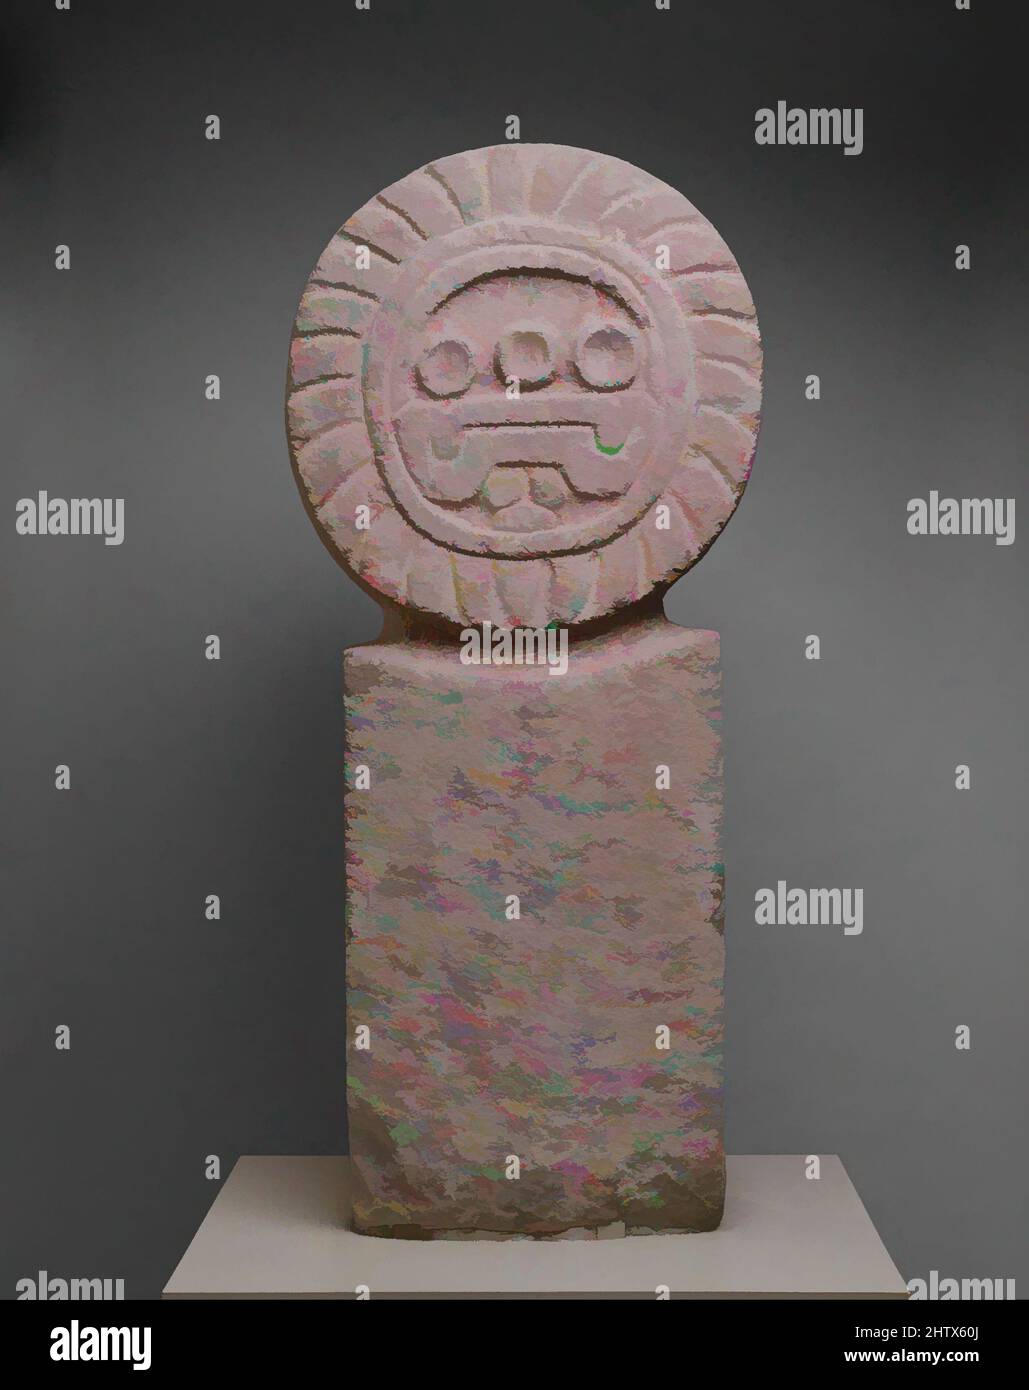 Art inspired by Stela, 3rd–7th century, Mexico, Mesoamerica, Teotihuacan, Stone, H. 41 3/4 x W. 14 3/4 x D. 8 in. (106 x 37.5 x 20.3 cm), Stone-Sculpture, Stone sculpture of the sort illustrated here is rare at the central Mexico site of Teotihuacan, although it is depicted in the, Classic works modernized by Artotop with a splash of modernity. Shapes, color and value, eye-catching visual impact on art. Emotions through freedom of artworks in a contemporary way. A timeless message pursuing a wildly creative new direction. Artists turning to the digital medium and creating the Artotop NFT Stock Photo